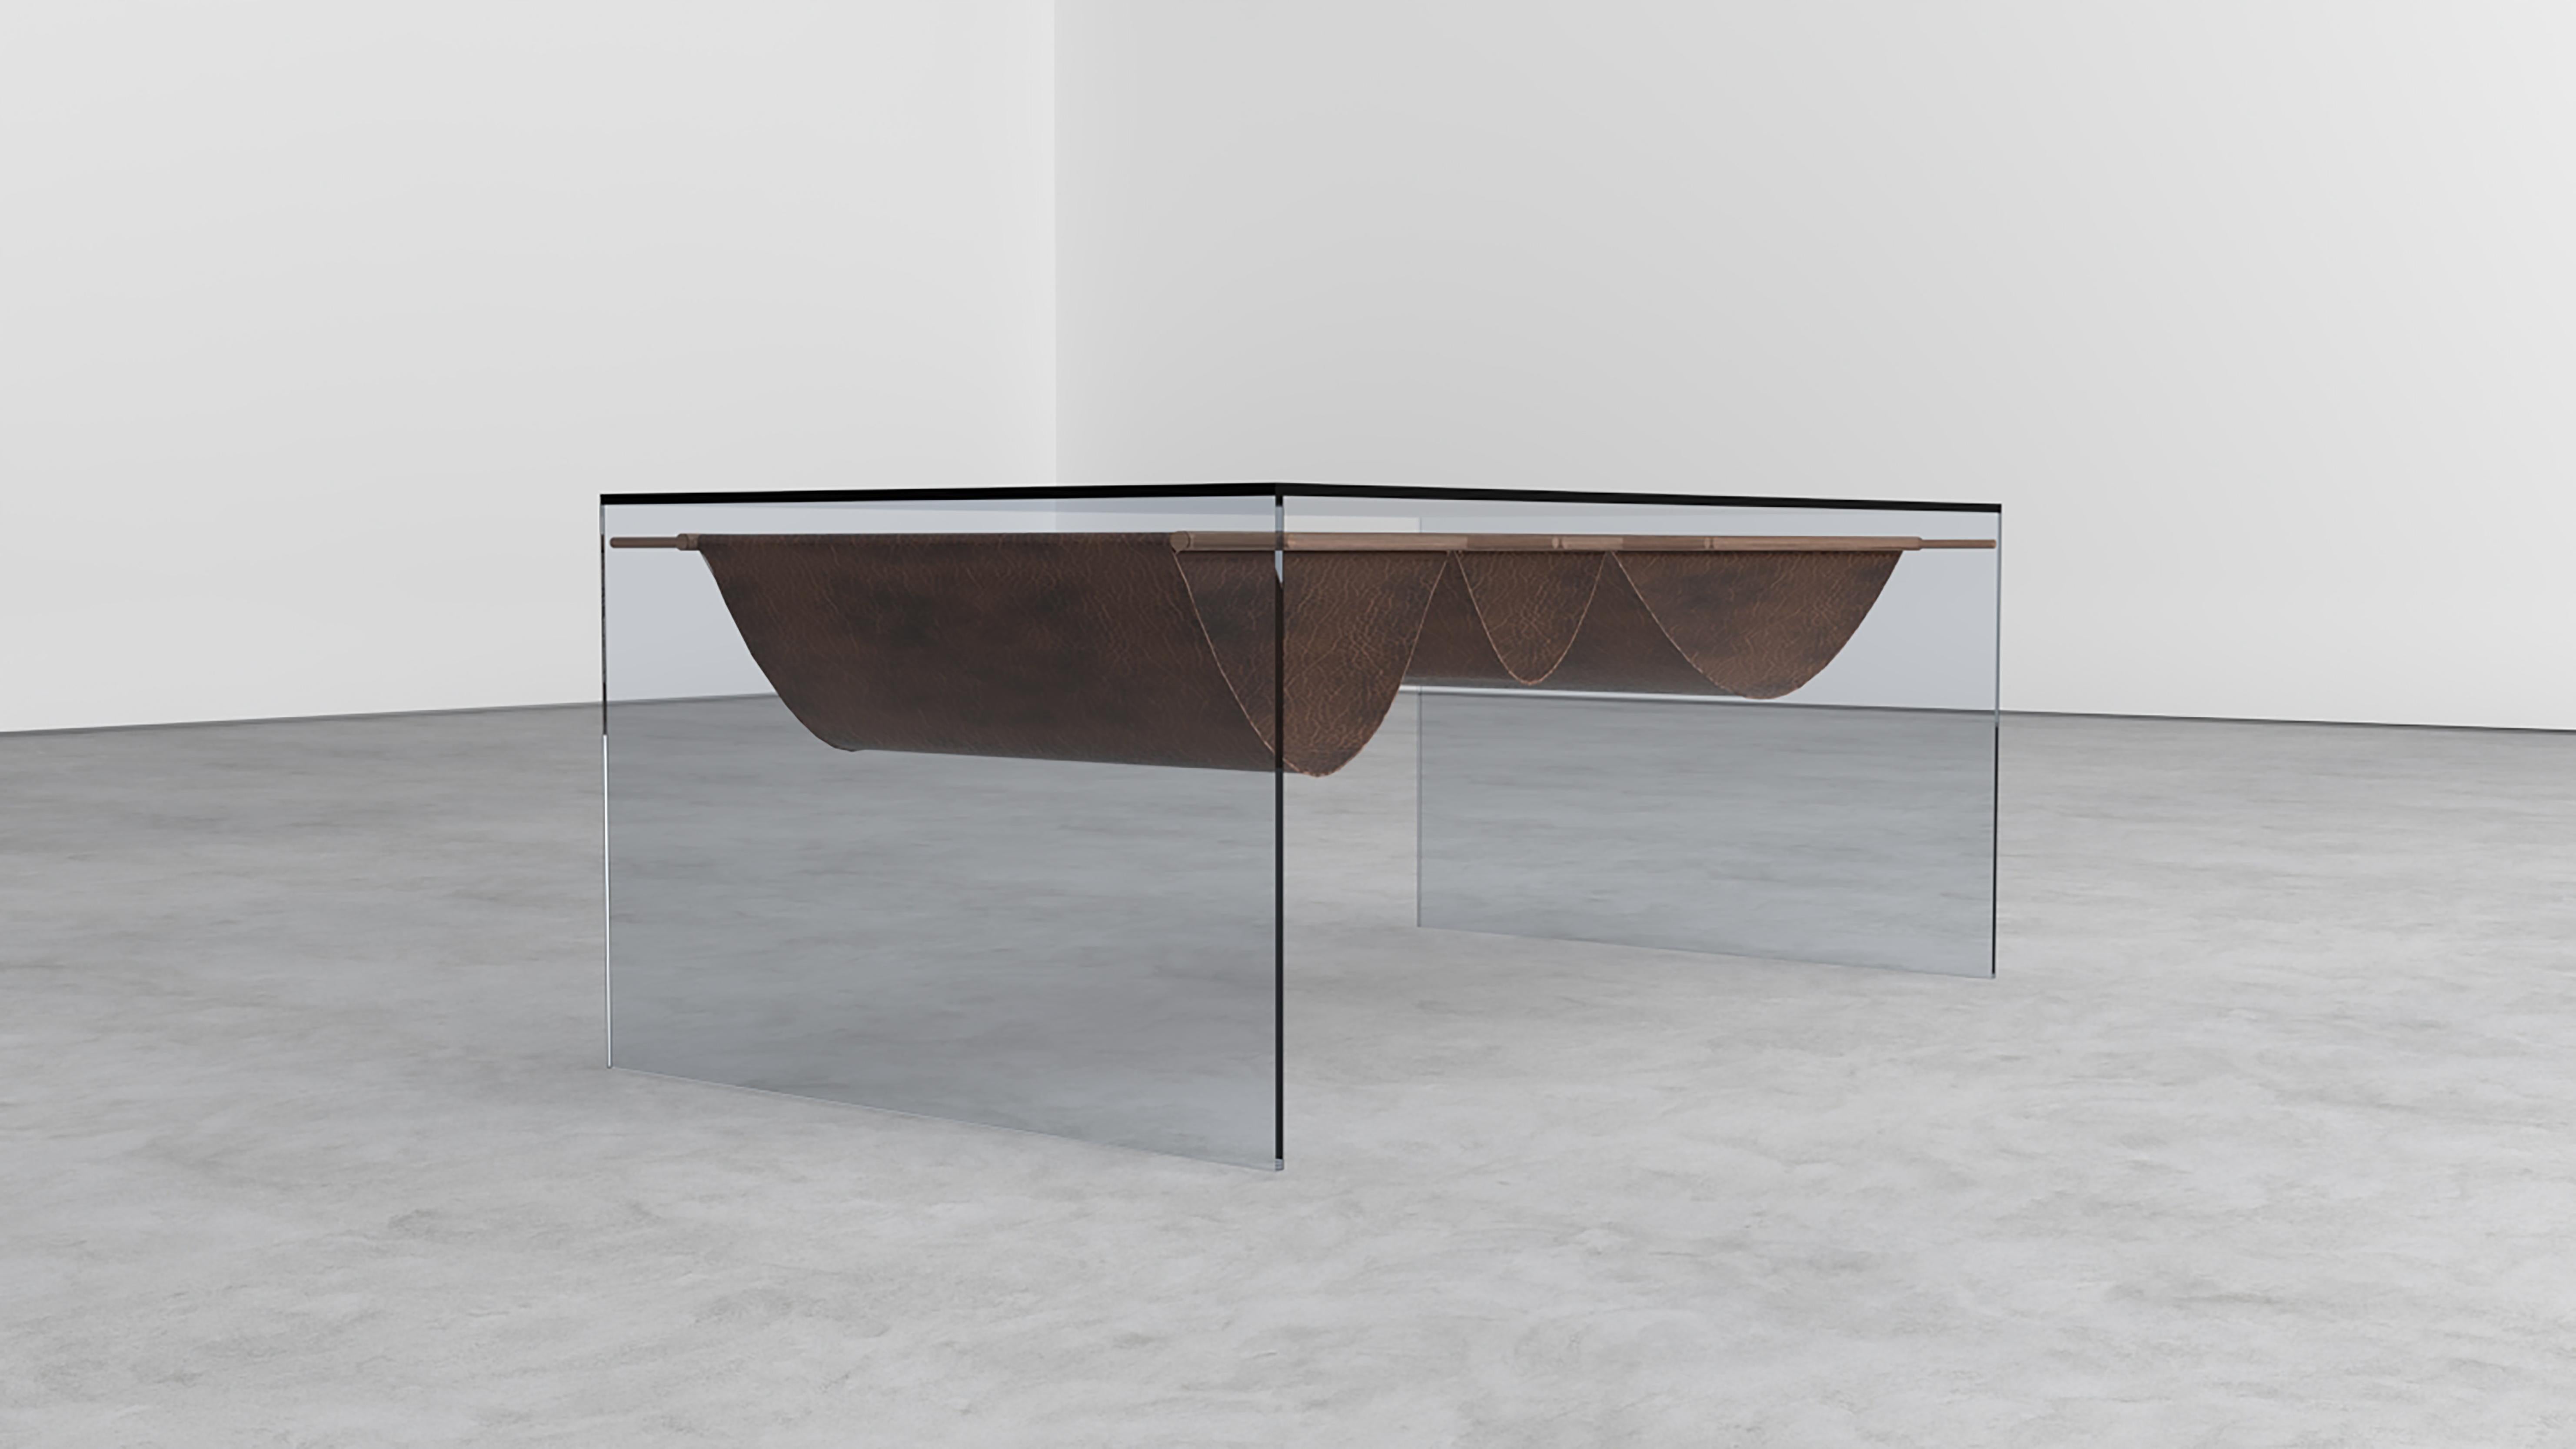 Oslo coffee table by Shou.
Dimensions: W 100 x D 60 x H 42 cm.
Materials: Tempered smoked glass, leather and wooden stick.

The coffee table is produced from the harmony of 8mm thick tempered smoked glass and 6mm thick polished wooden structure